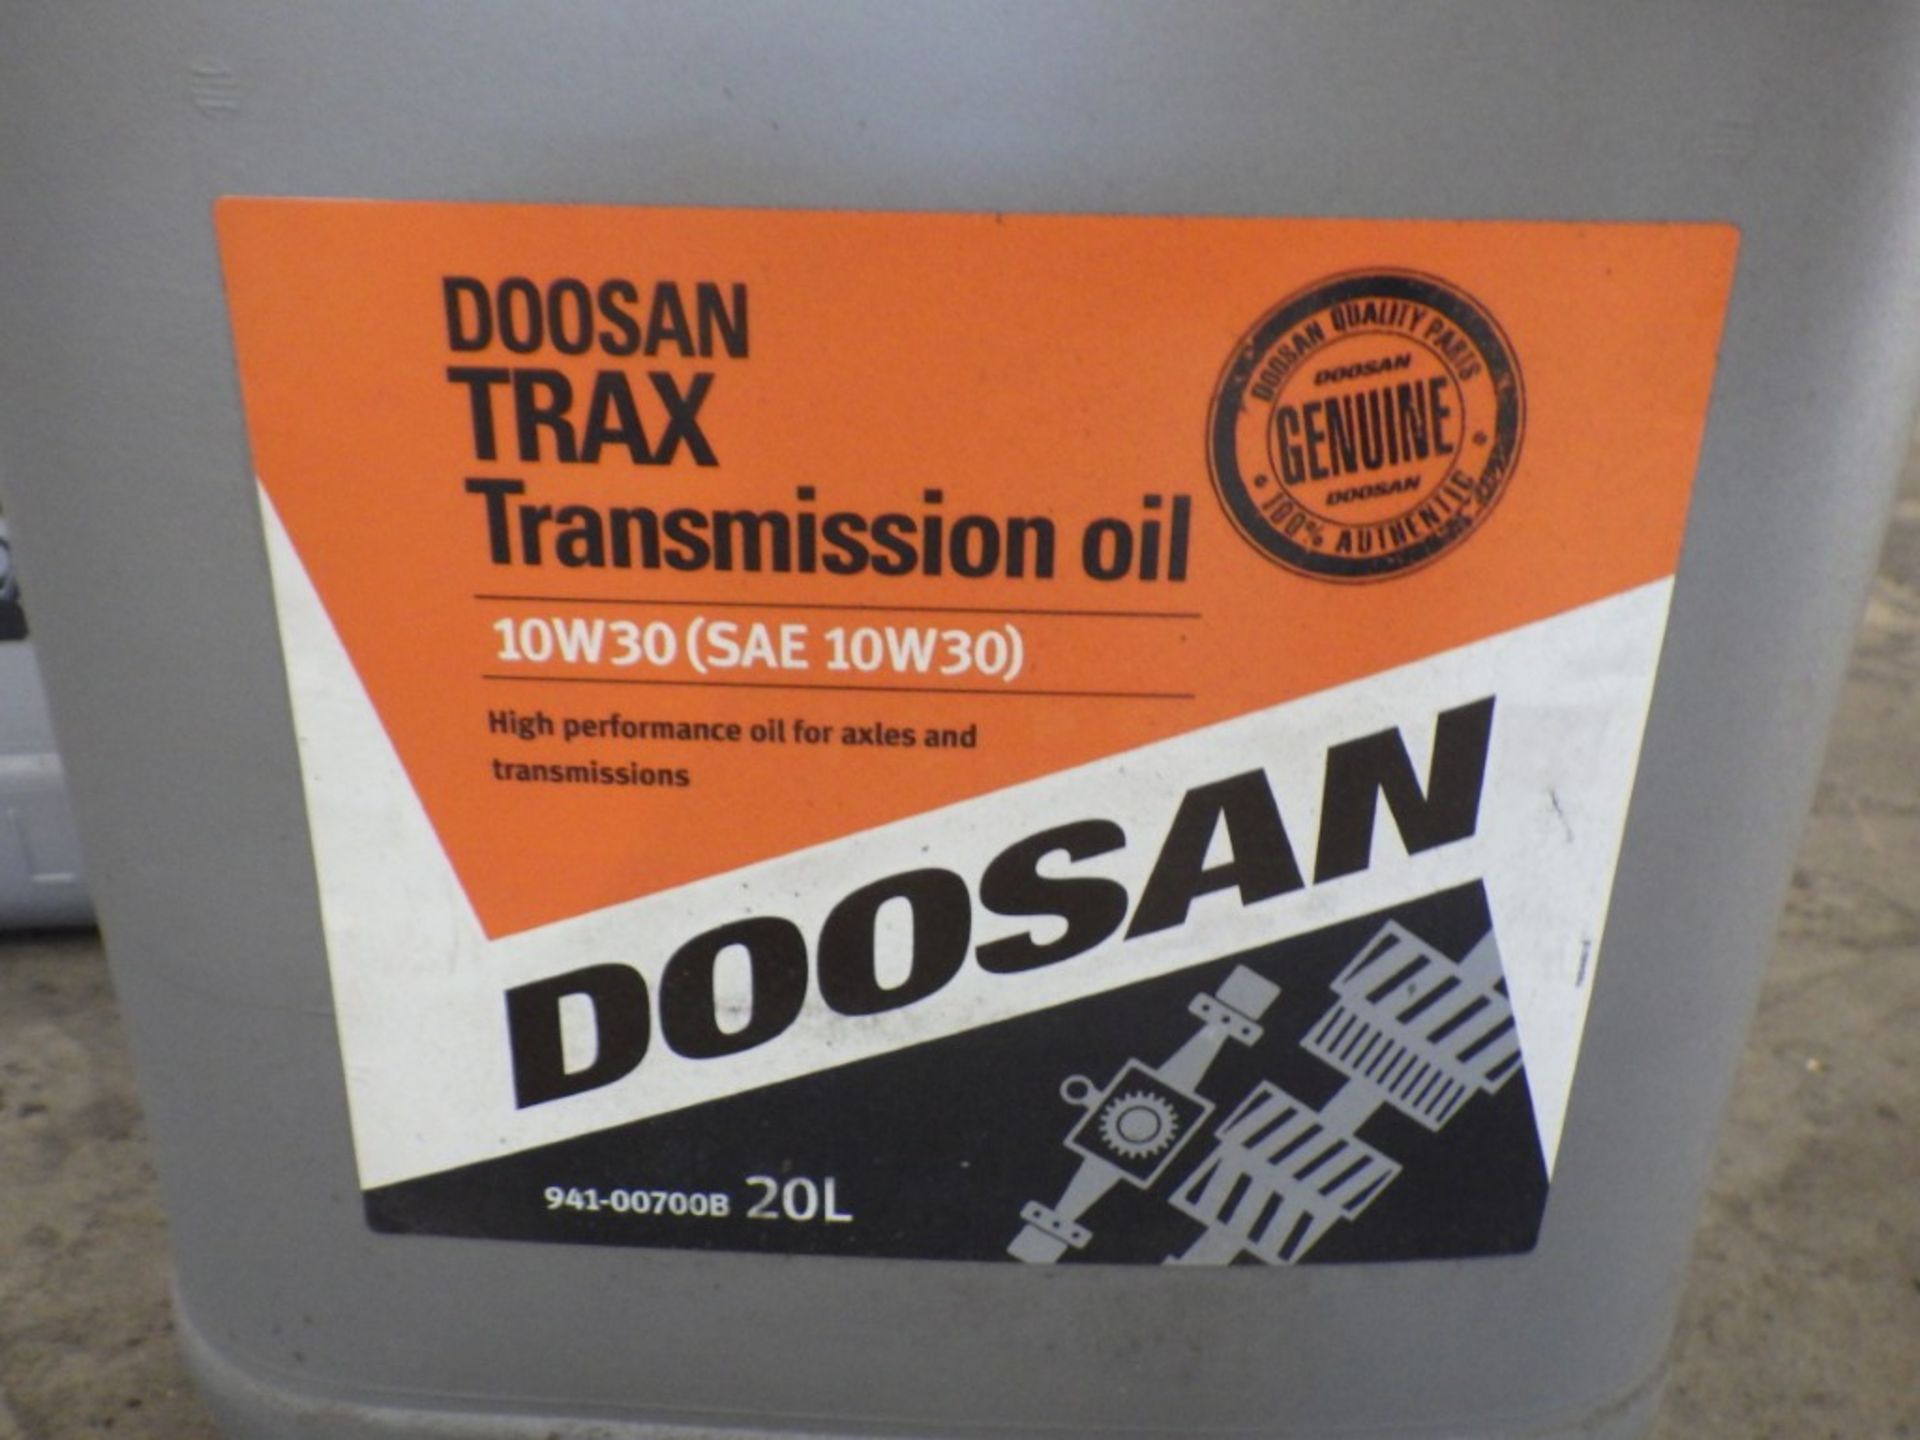 DOOSAN 10W30 (SAE 10W30) TRAX TRANSMISSION OIL HIGH PERFORMANCE FOR AXLES & TRANSMISSIONS, 20L - Image 2 of 4